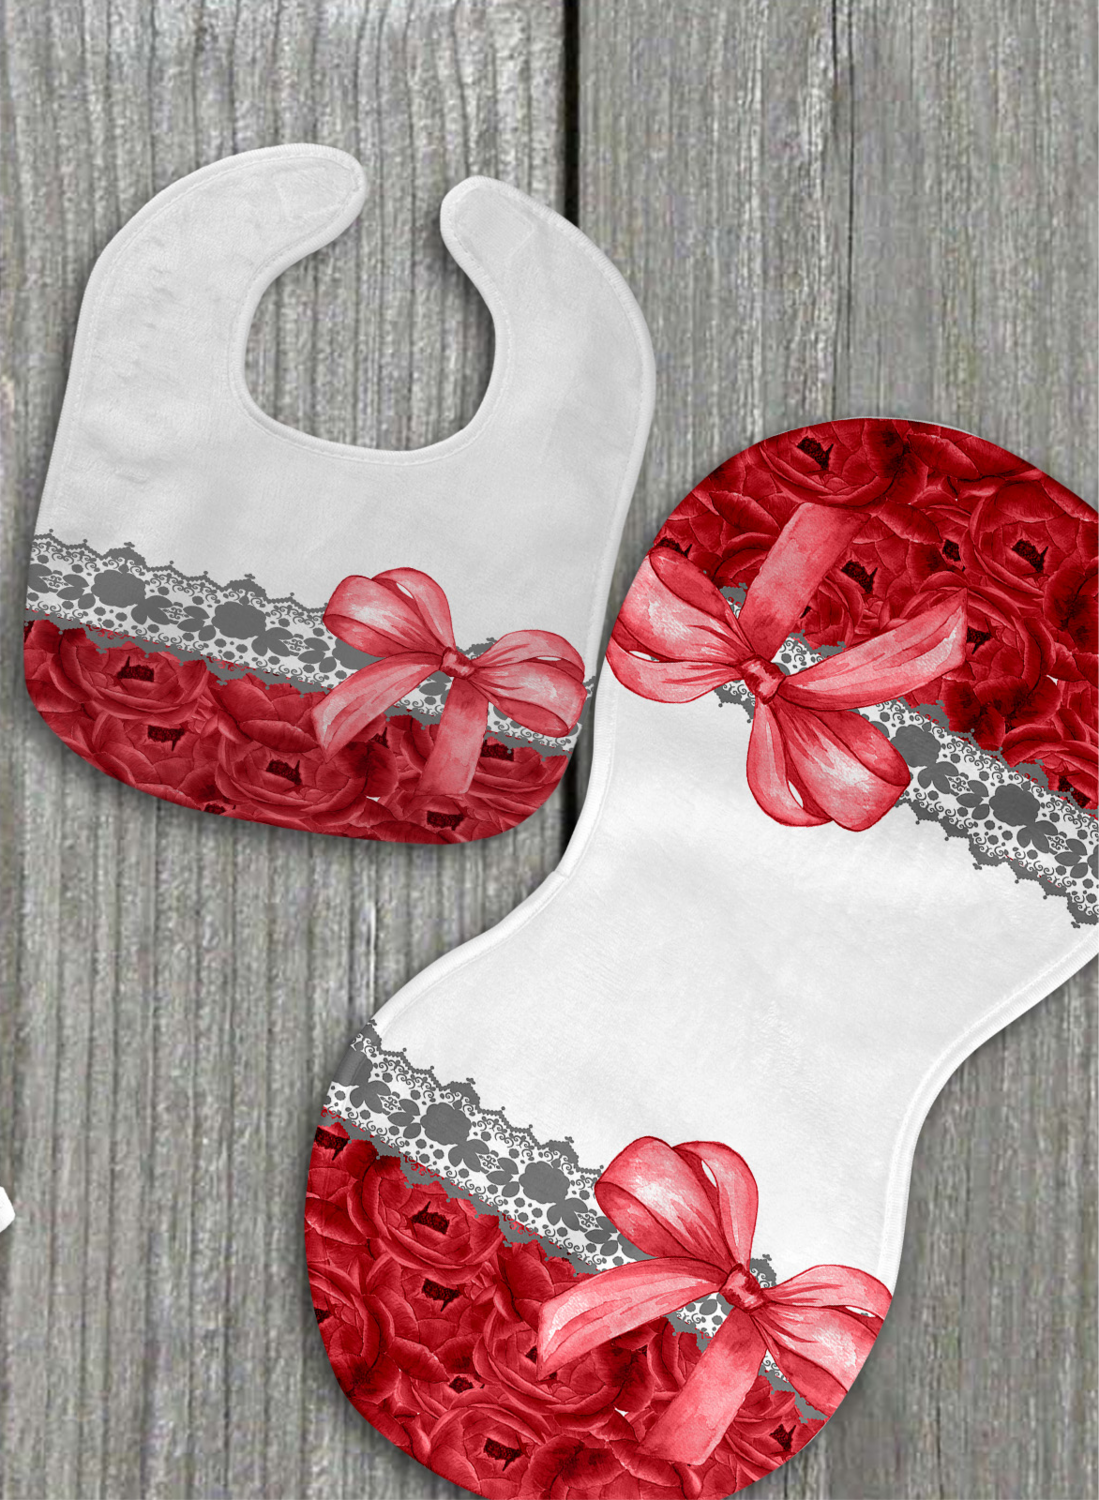 Rose and Gray bib and burp set with personalization